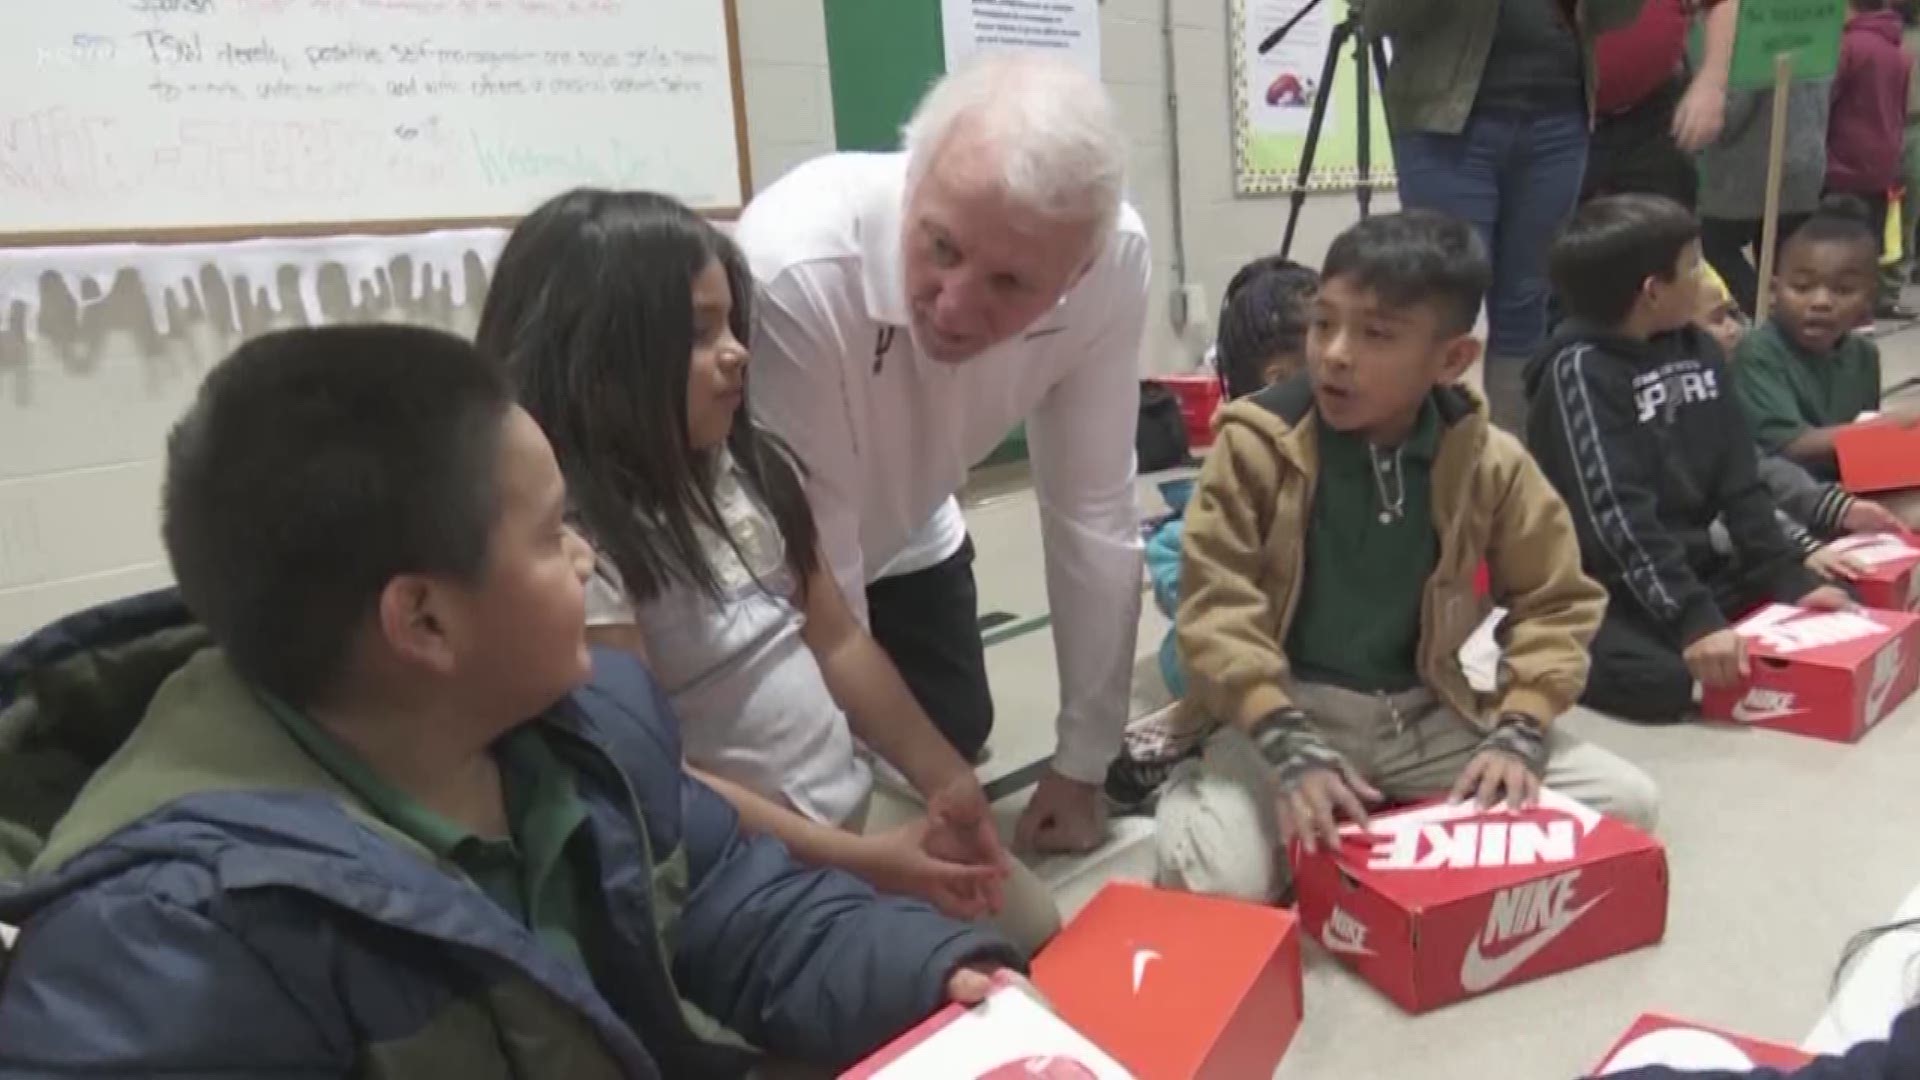 Coach Popovich and Spurs Guard Derrick White made the day for elementary school kids today with a special donation. Eyewitness News reporter Aaron Wright takes us there.